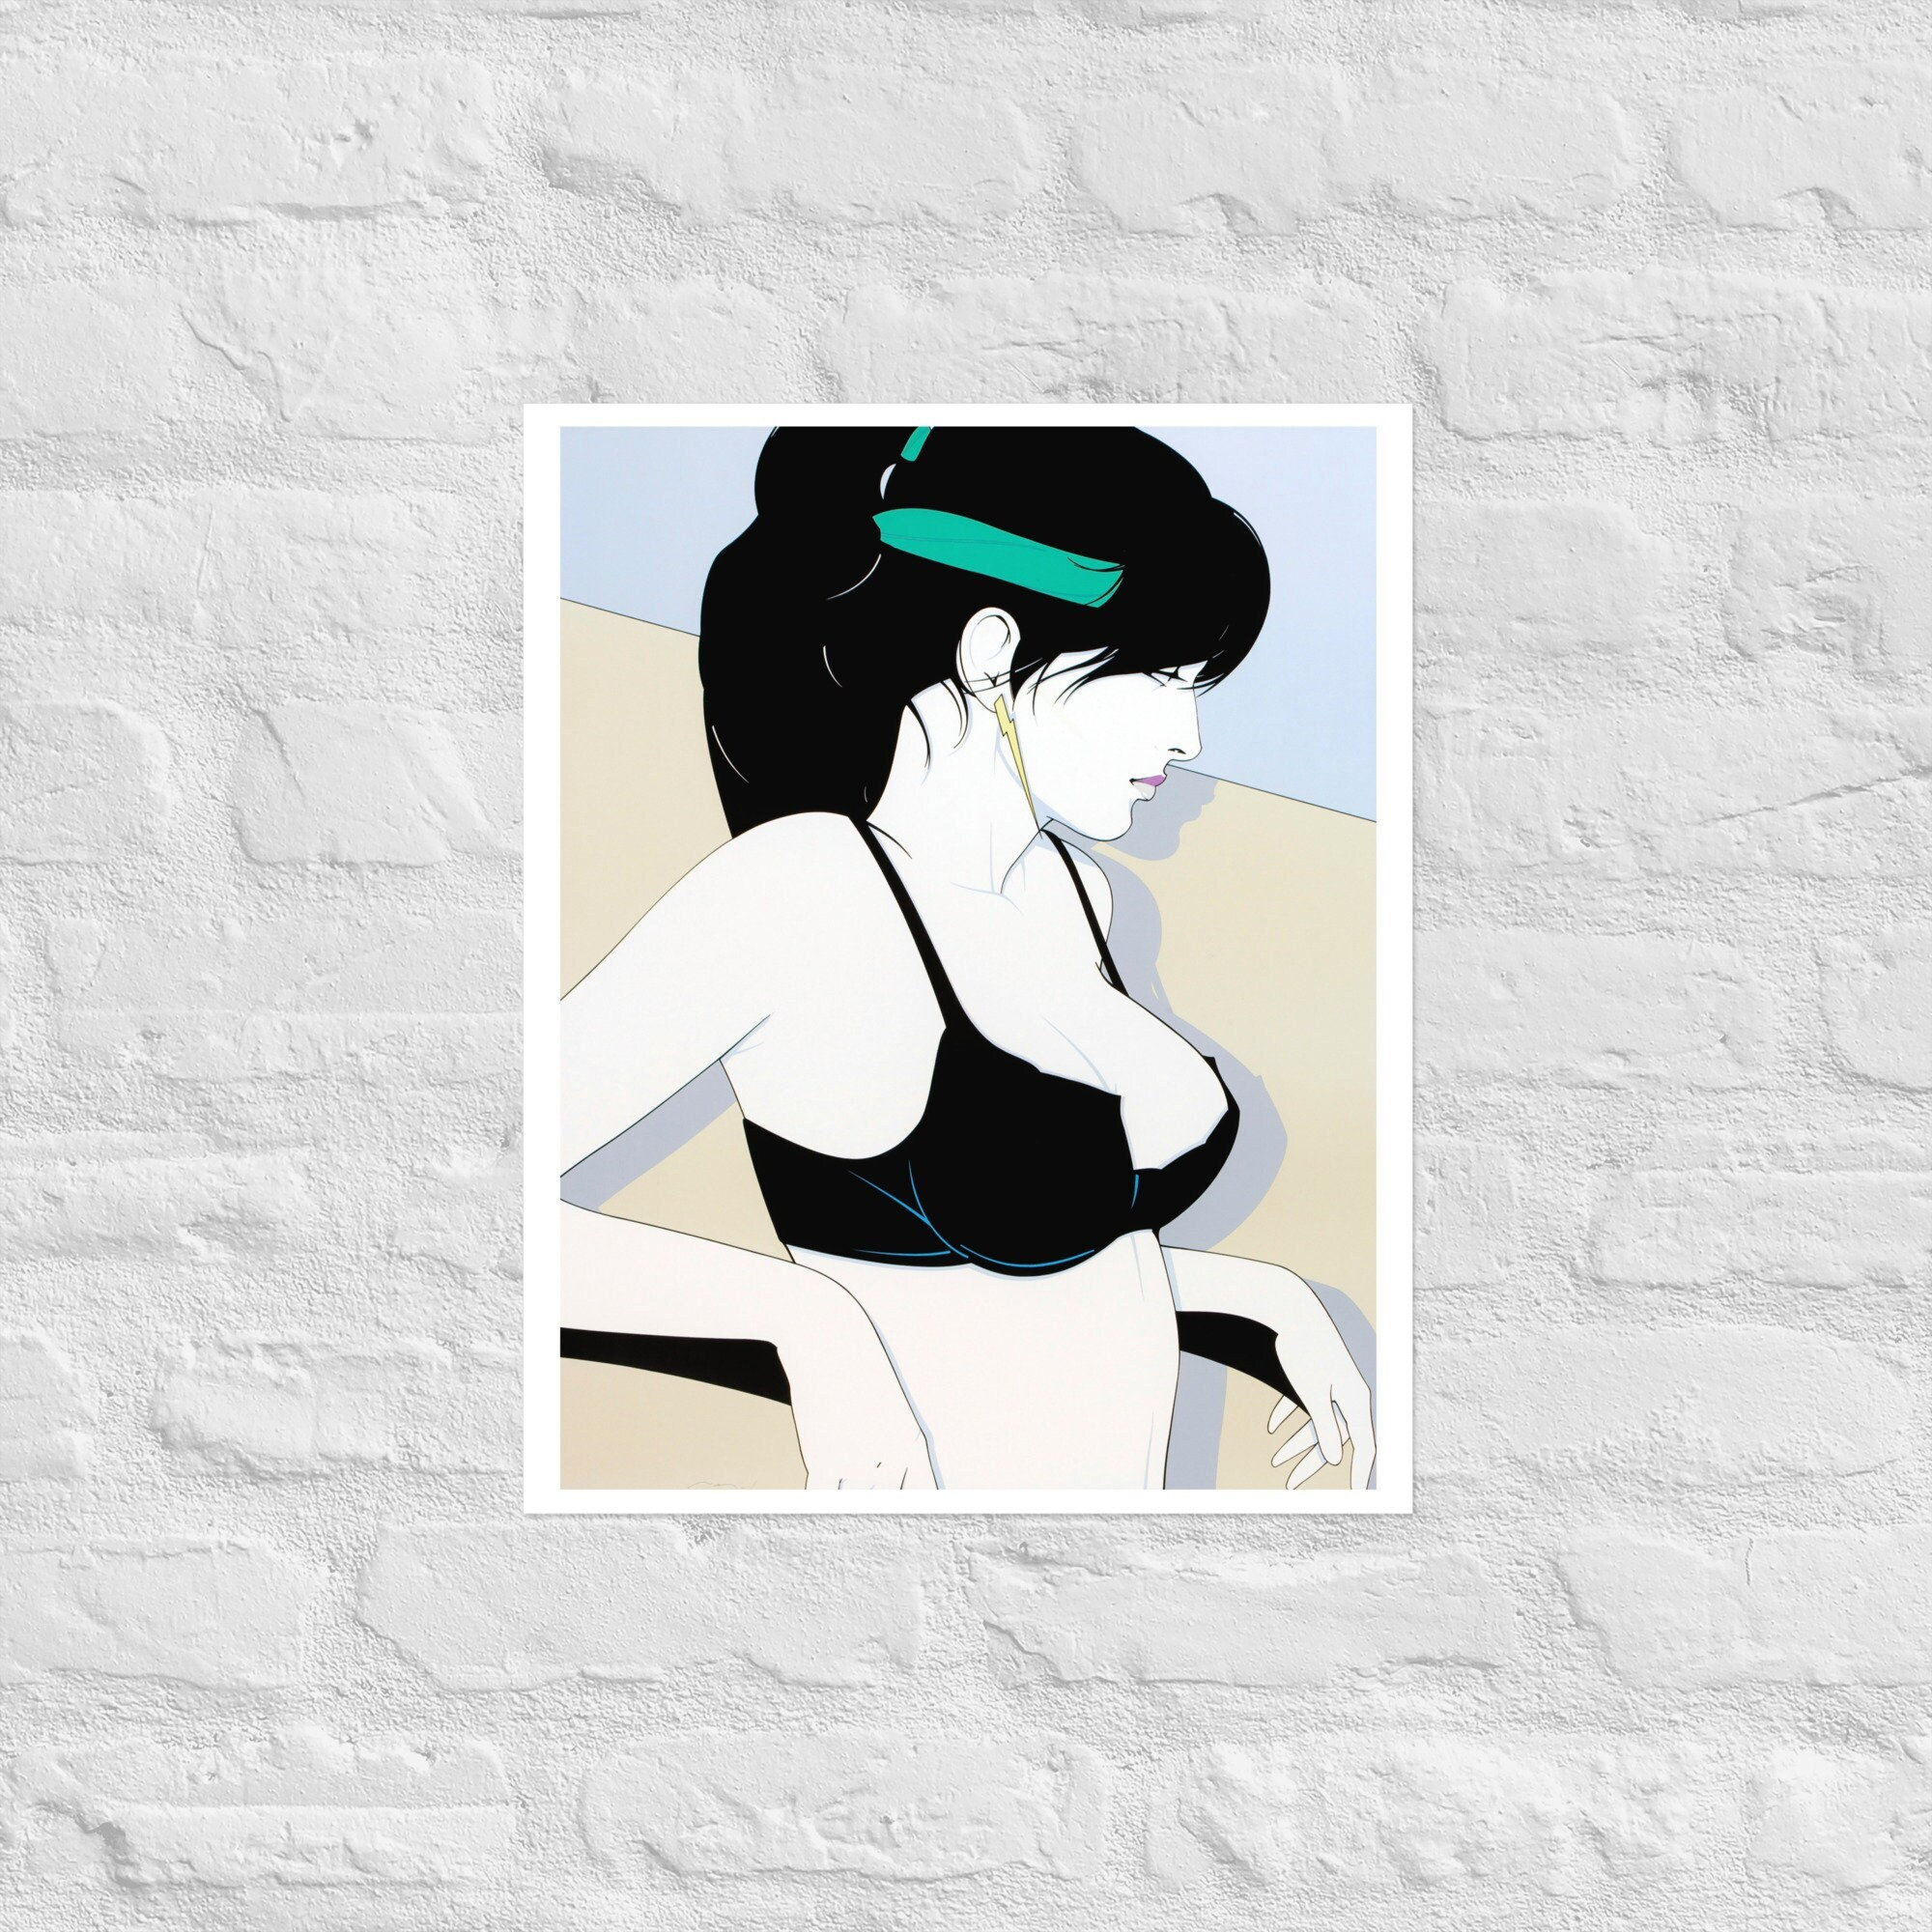 Snake Tattoo Playboy Advisor Final June 1977 by Patrick Nagel. For Sale!,  in SwimmersGirl Art's . FOR SALE A selection Pinup /Comic Original  Paintings, Illustrations and Drawings (.$10000 +) Higher end art.